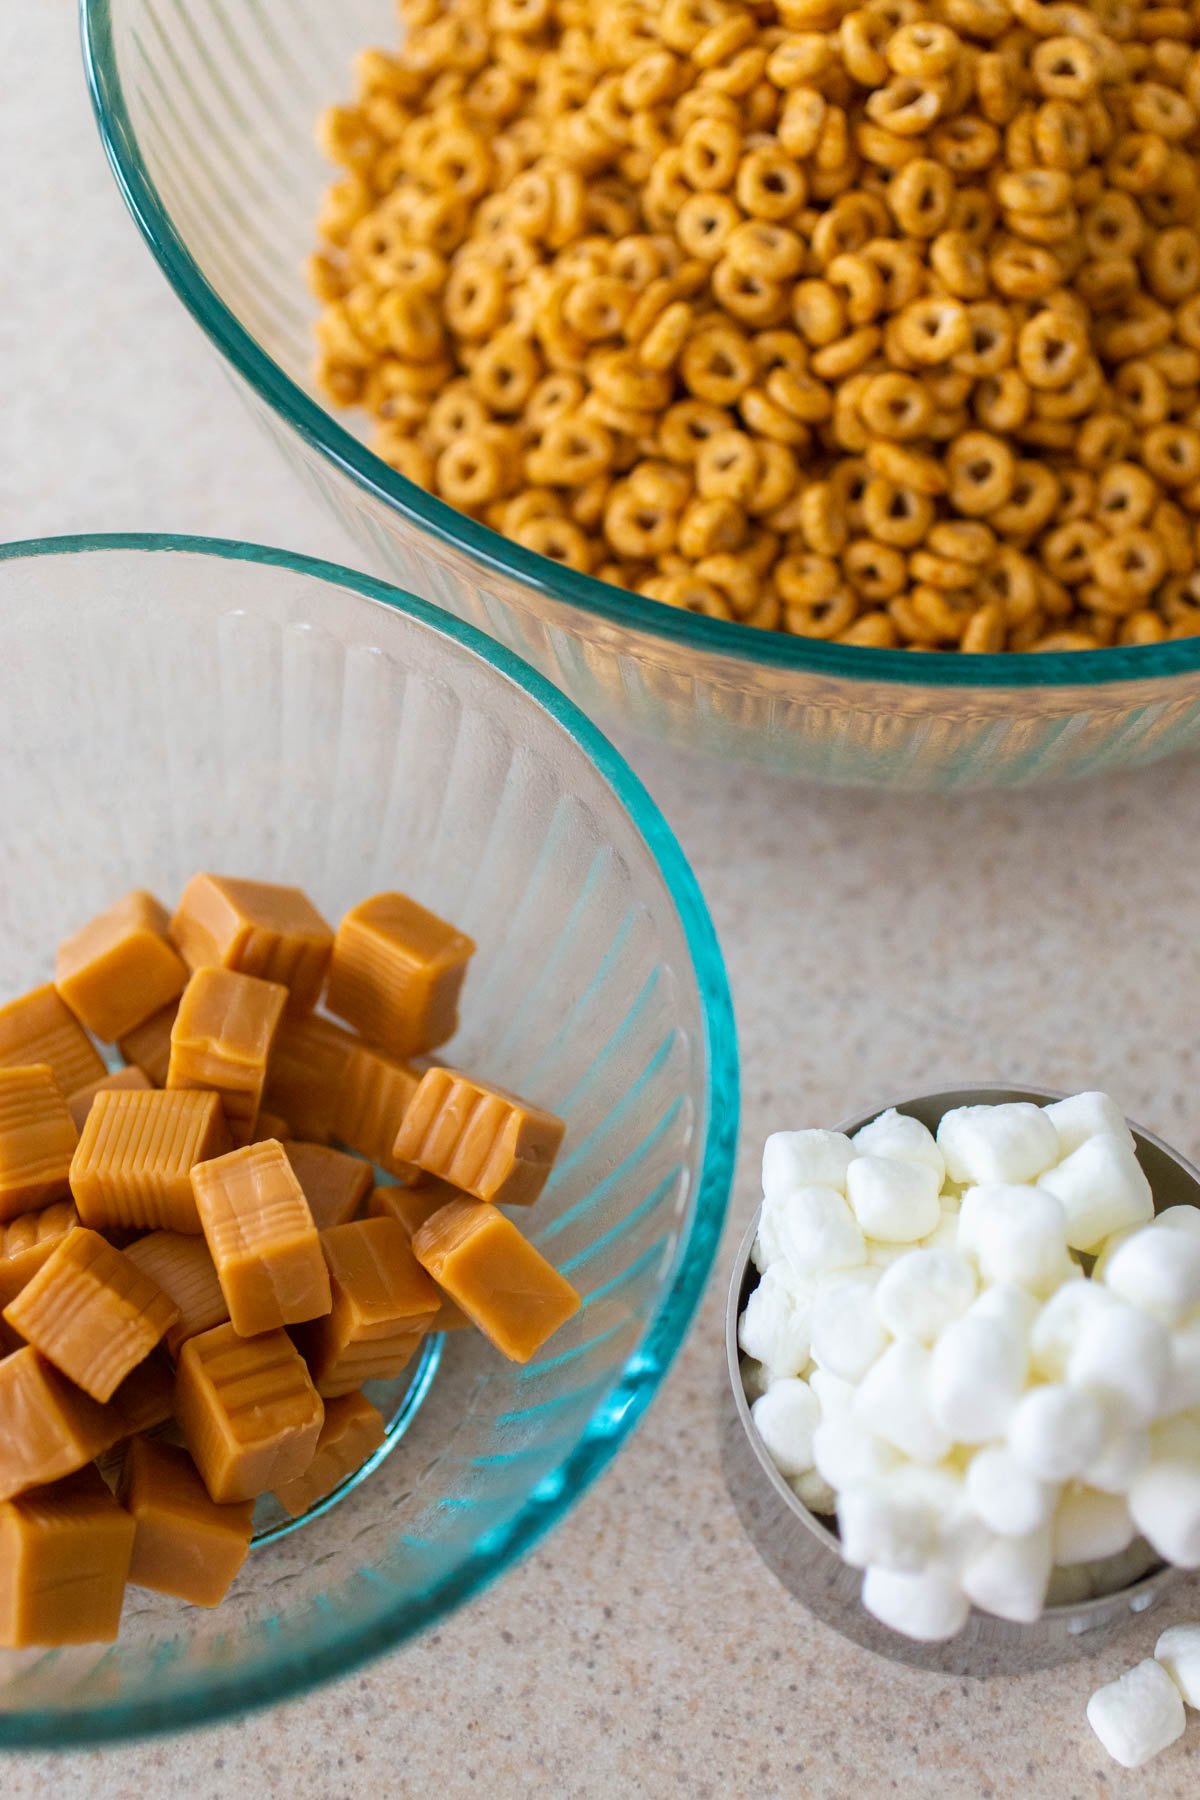 The Pumpkin Spice Cheerios cereal is in a mixing bowl next to caramel candies and marshmallows.